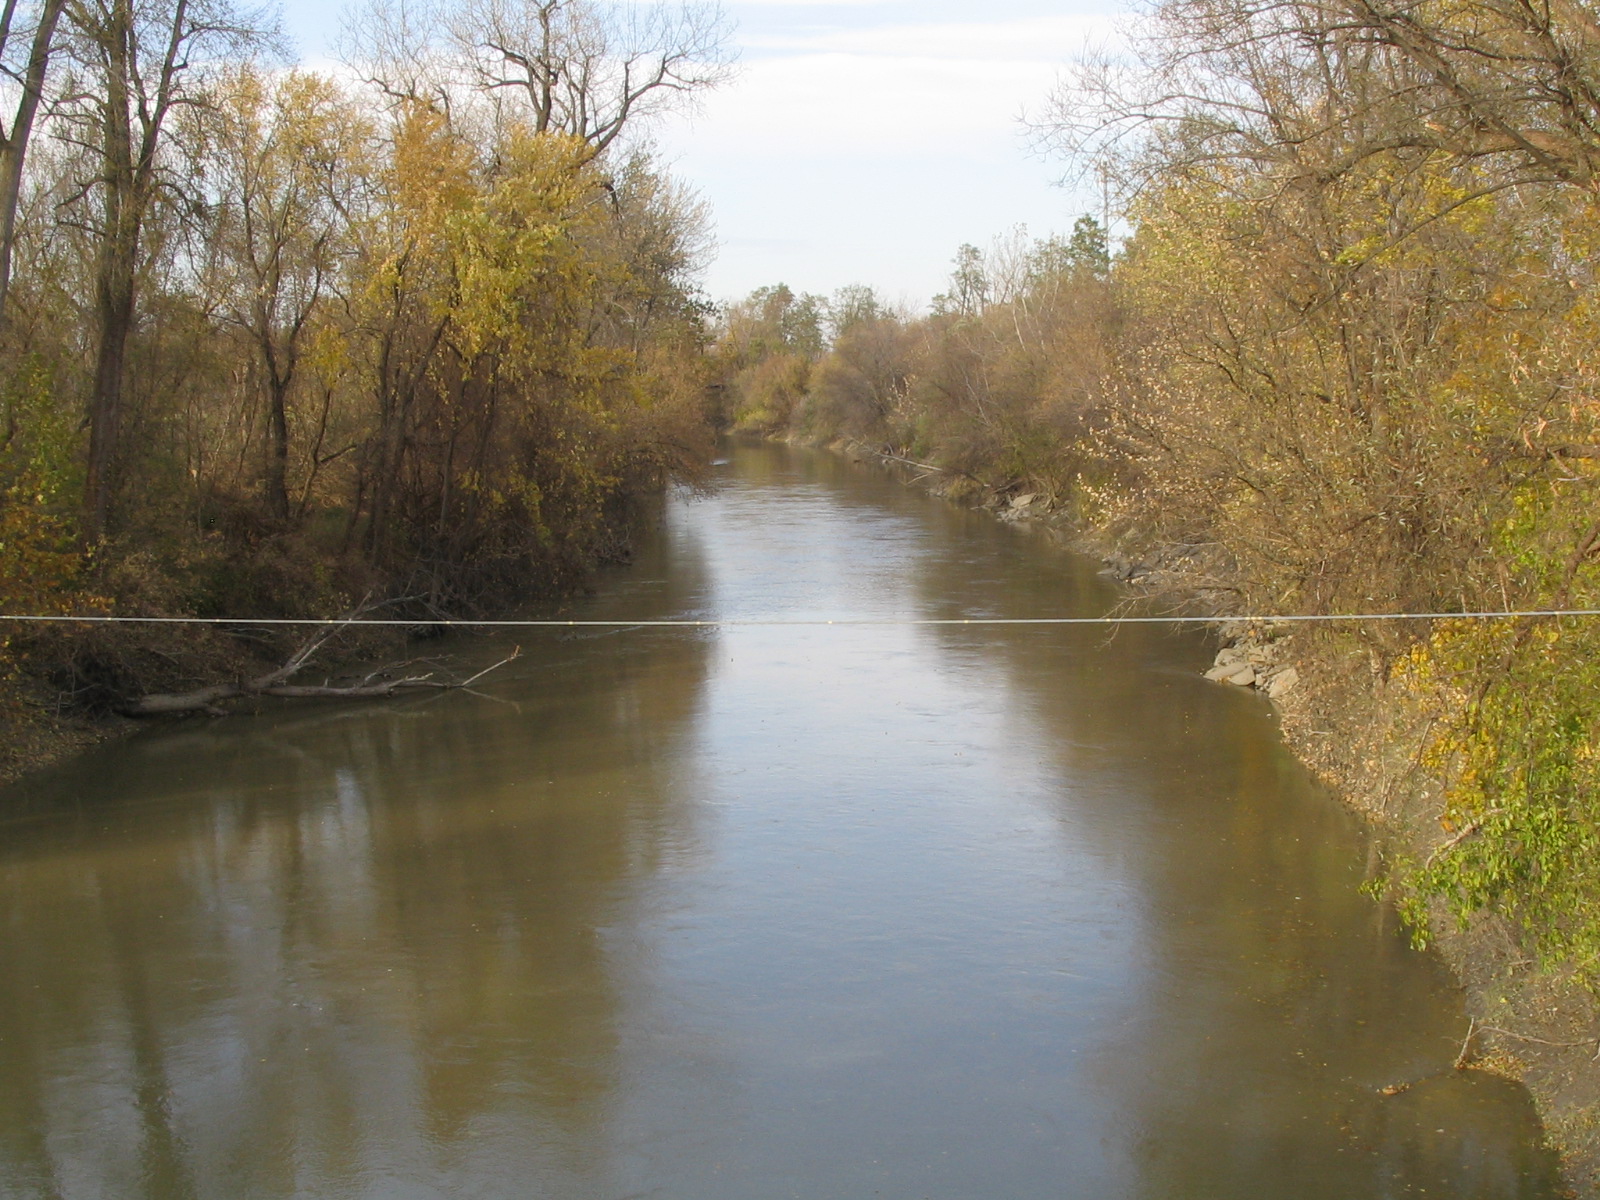 Photograph of the Genesee River at Avon, NY (AVON6)